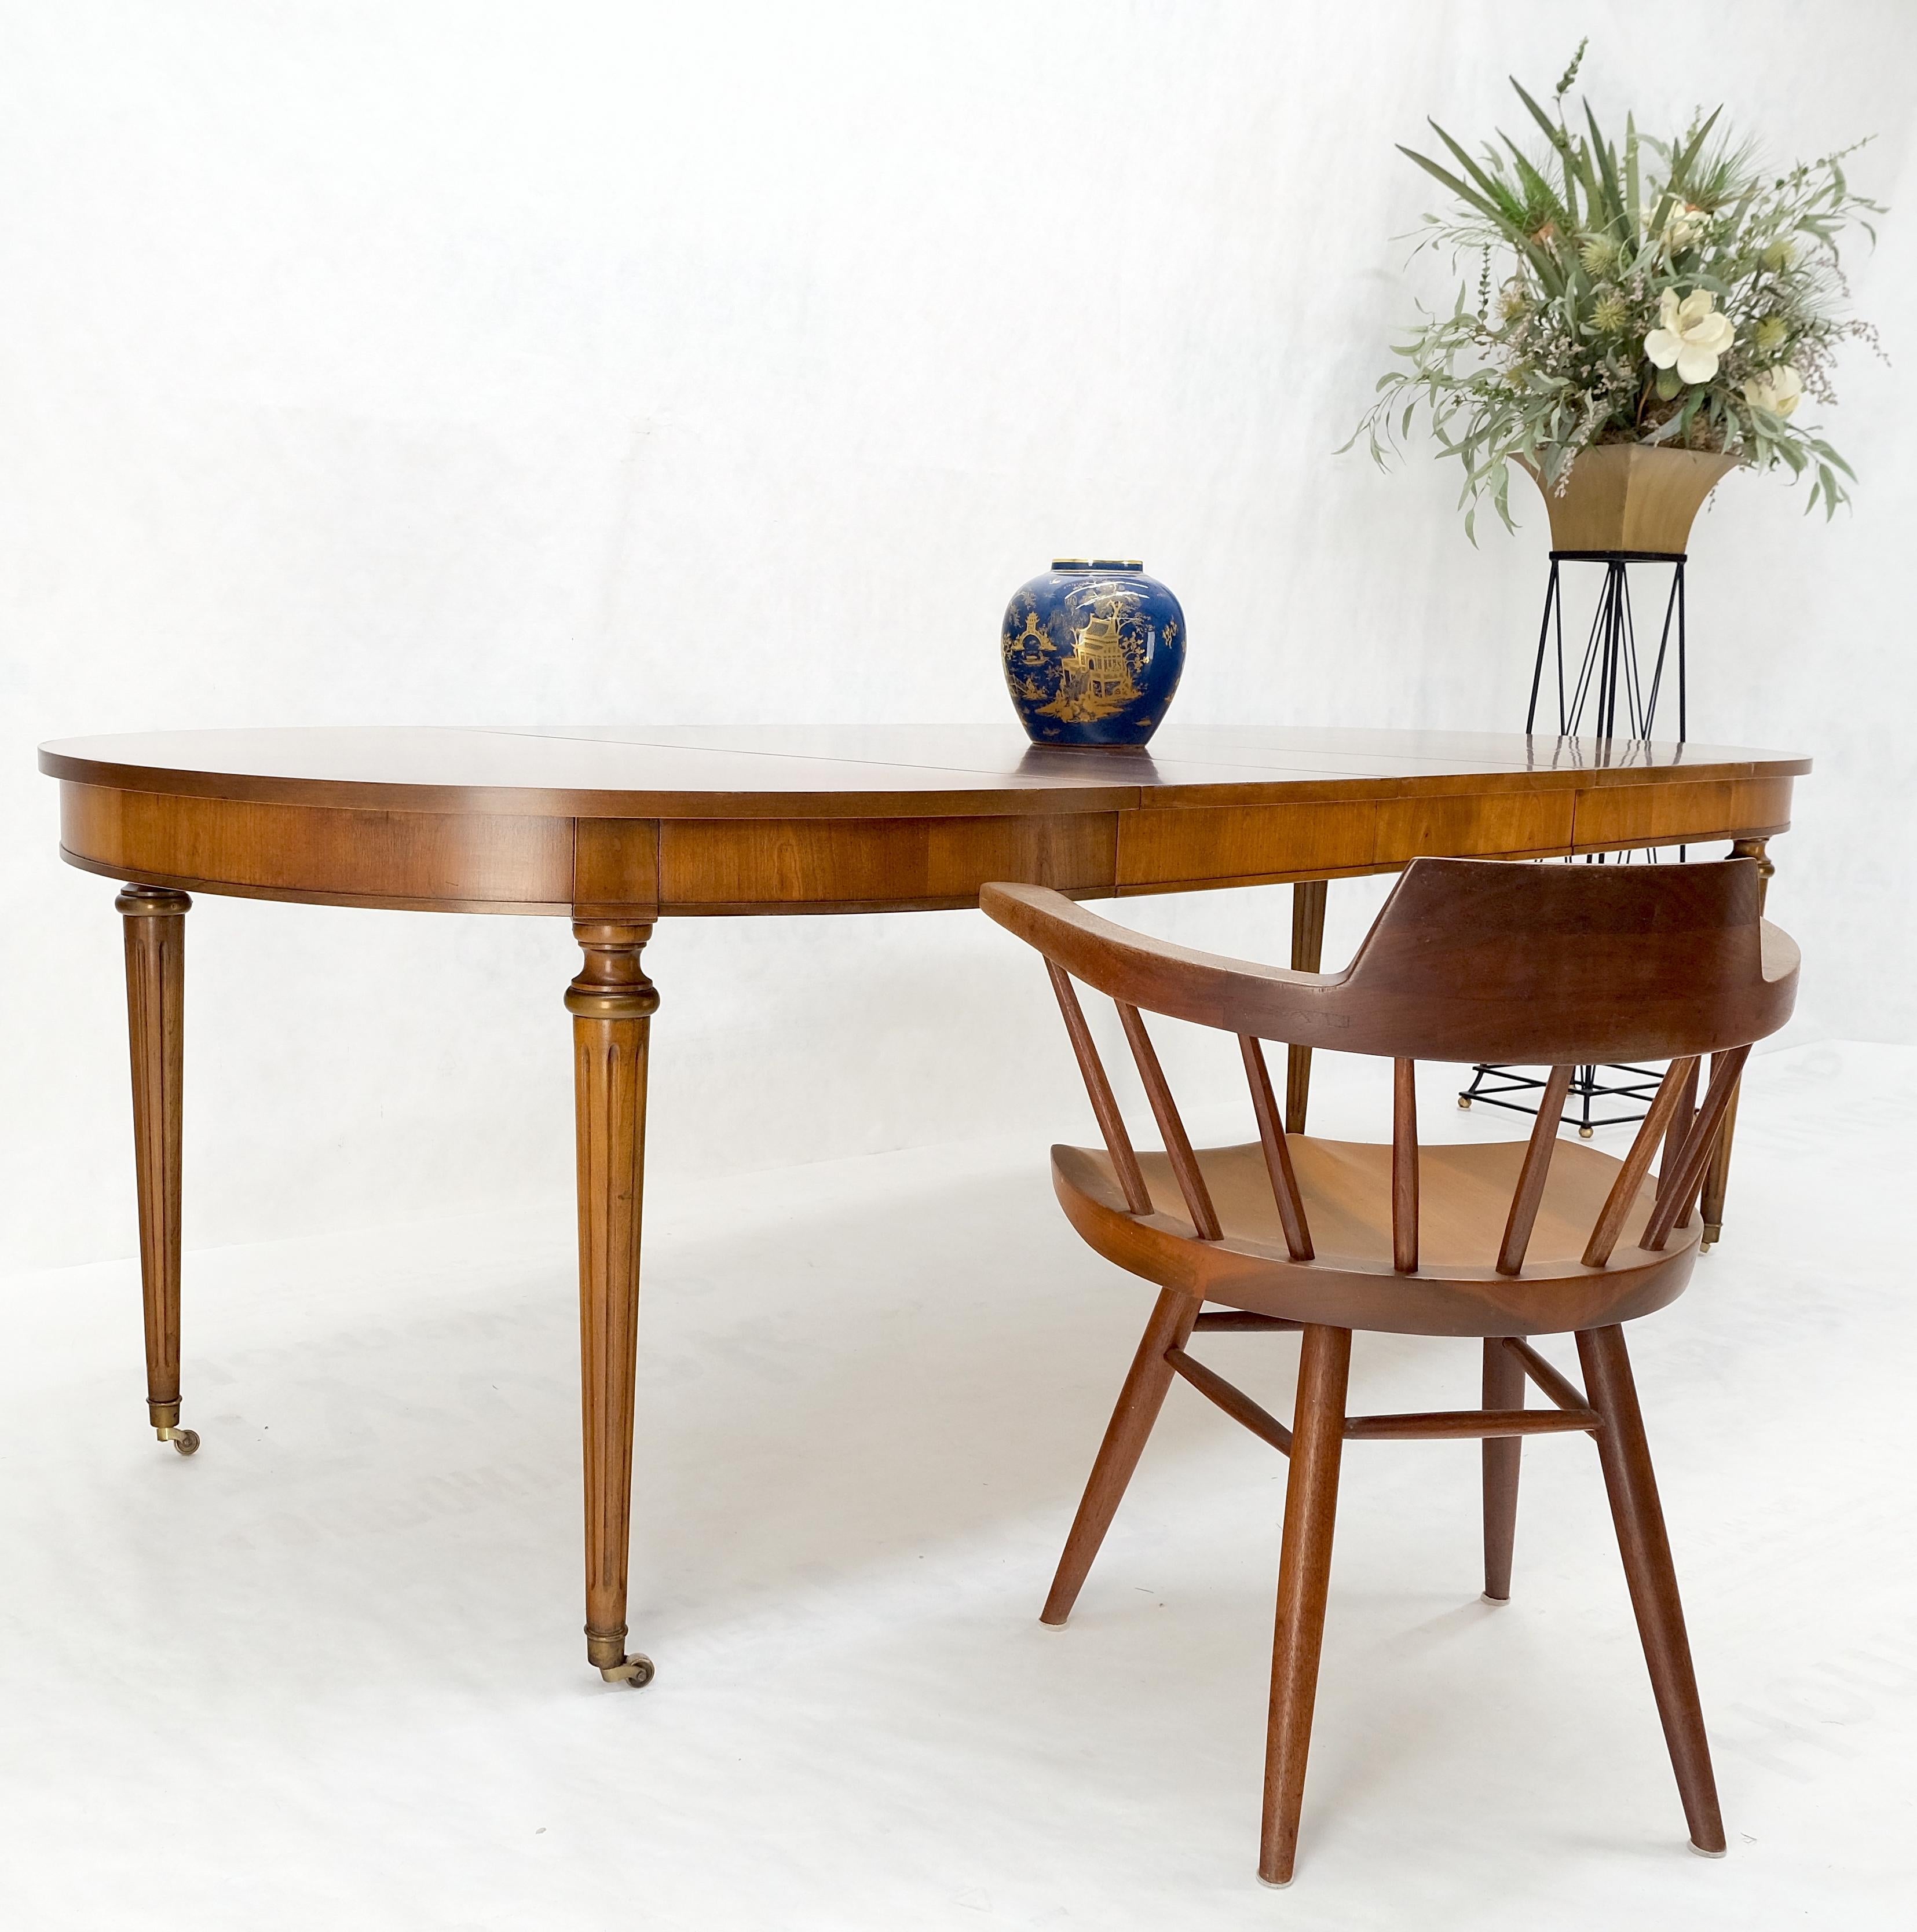 American Mid-Century Oval Satinwood DiningTable 3 Leaves Fluted Tapered Leg Mint For Sale 5